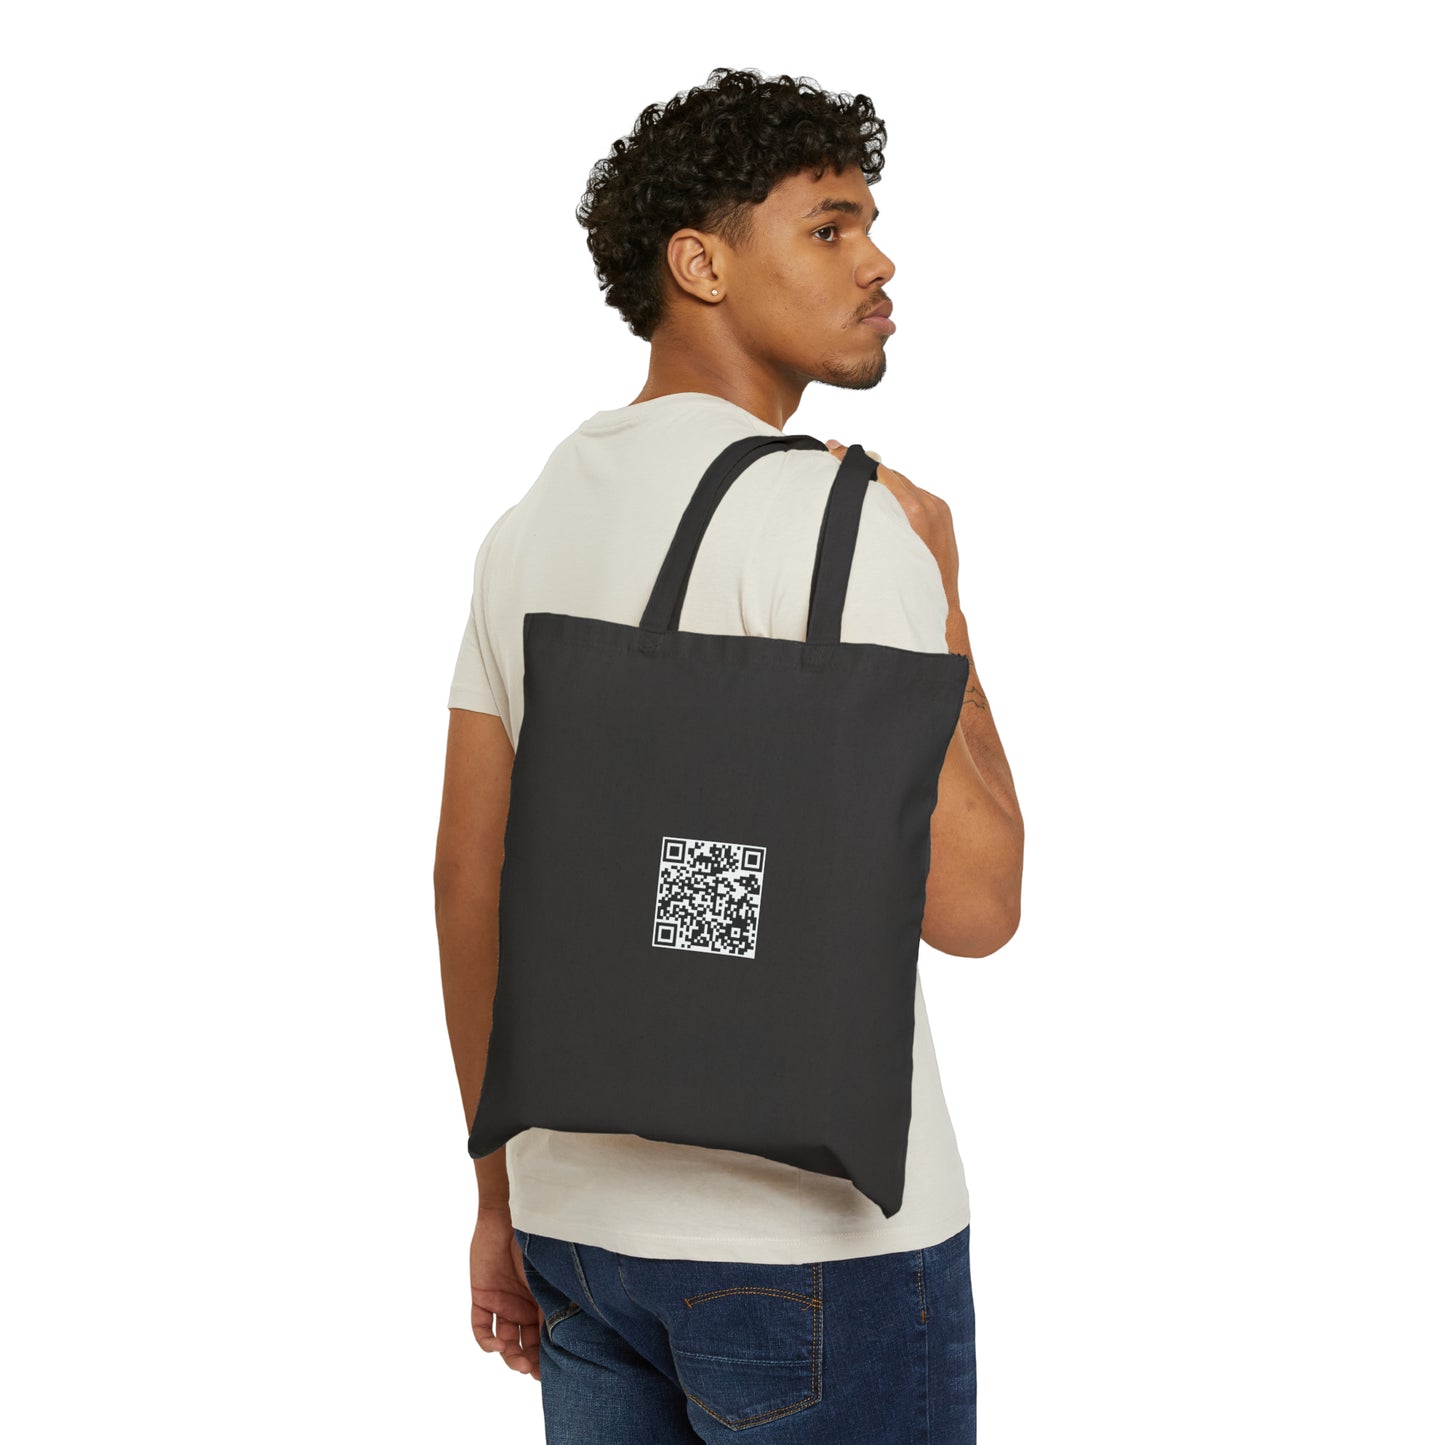 The Firing Line - Cotton Canvas Tote Bag